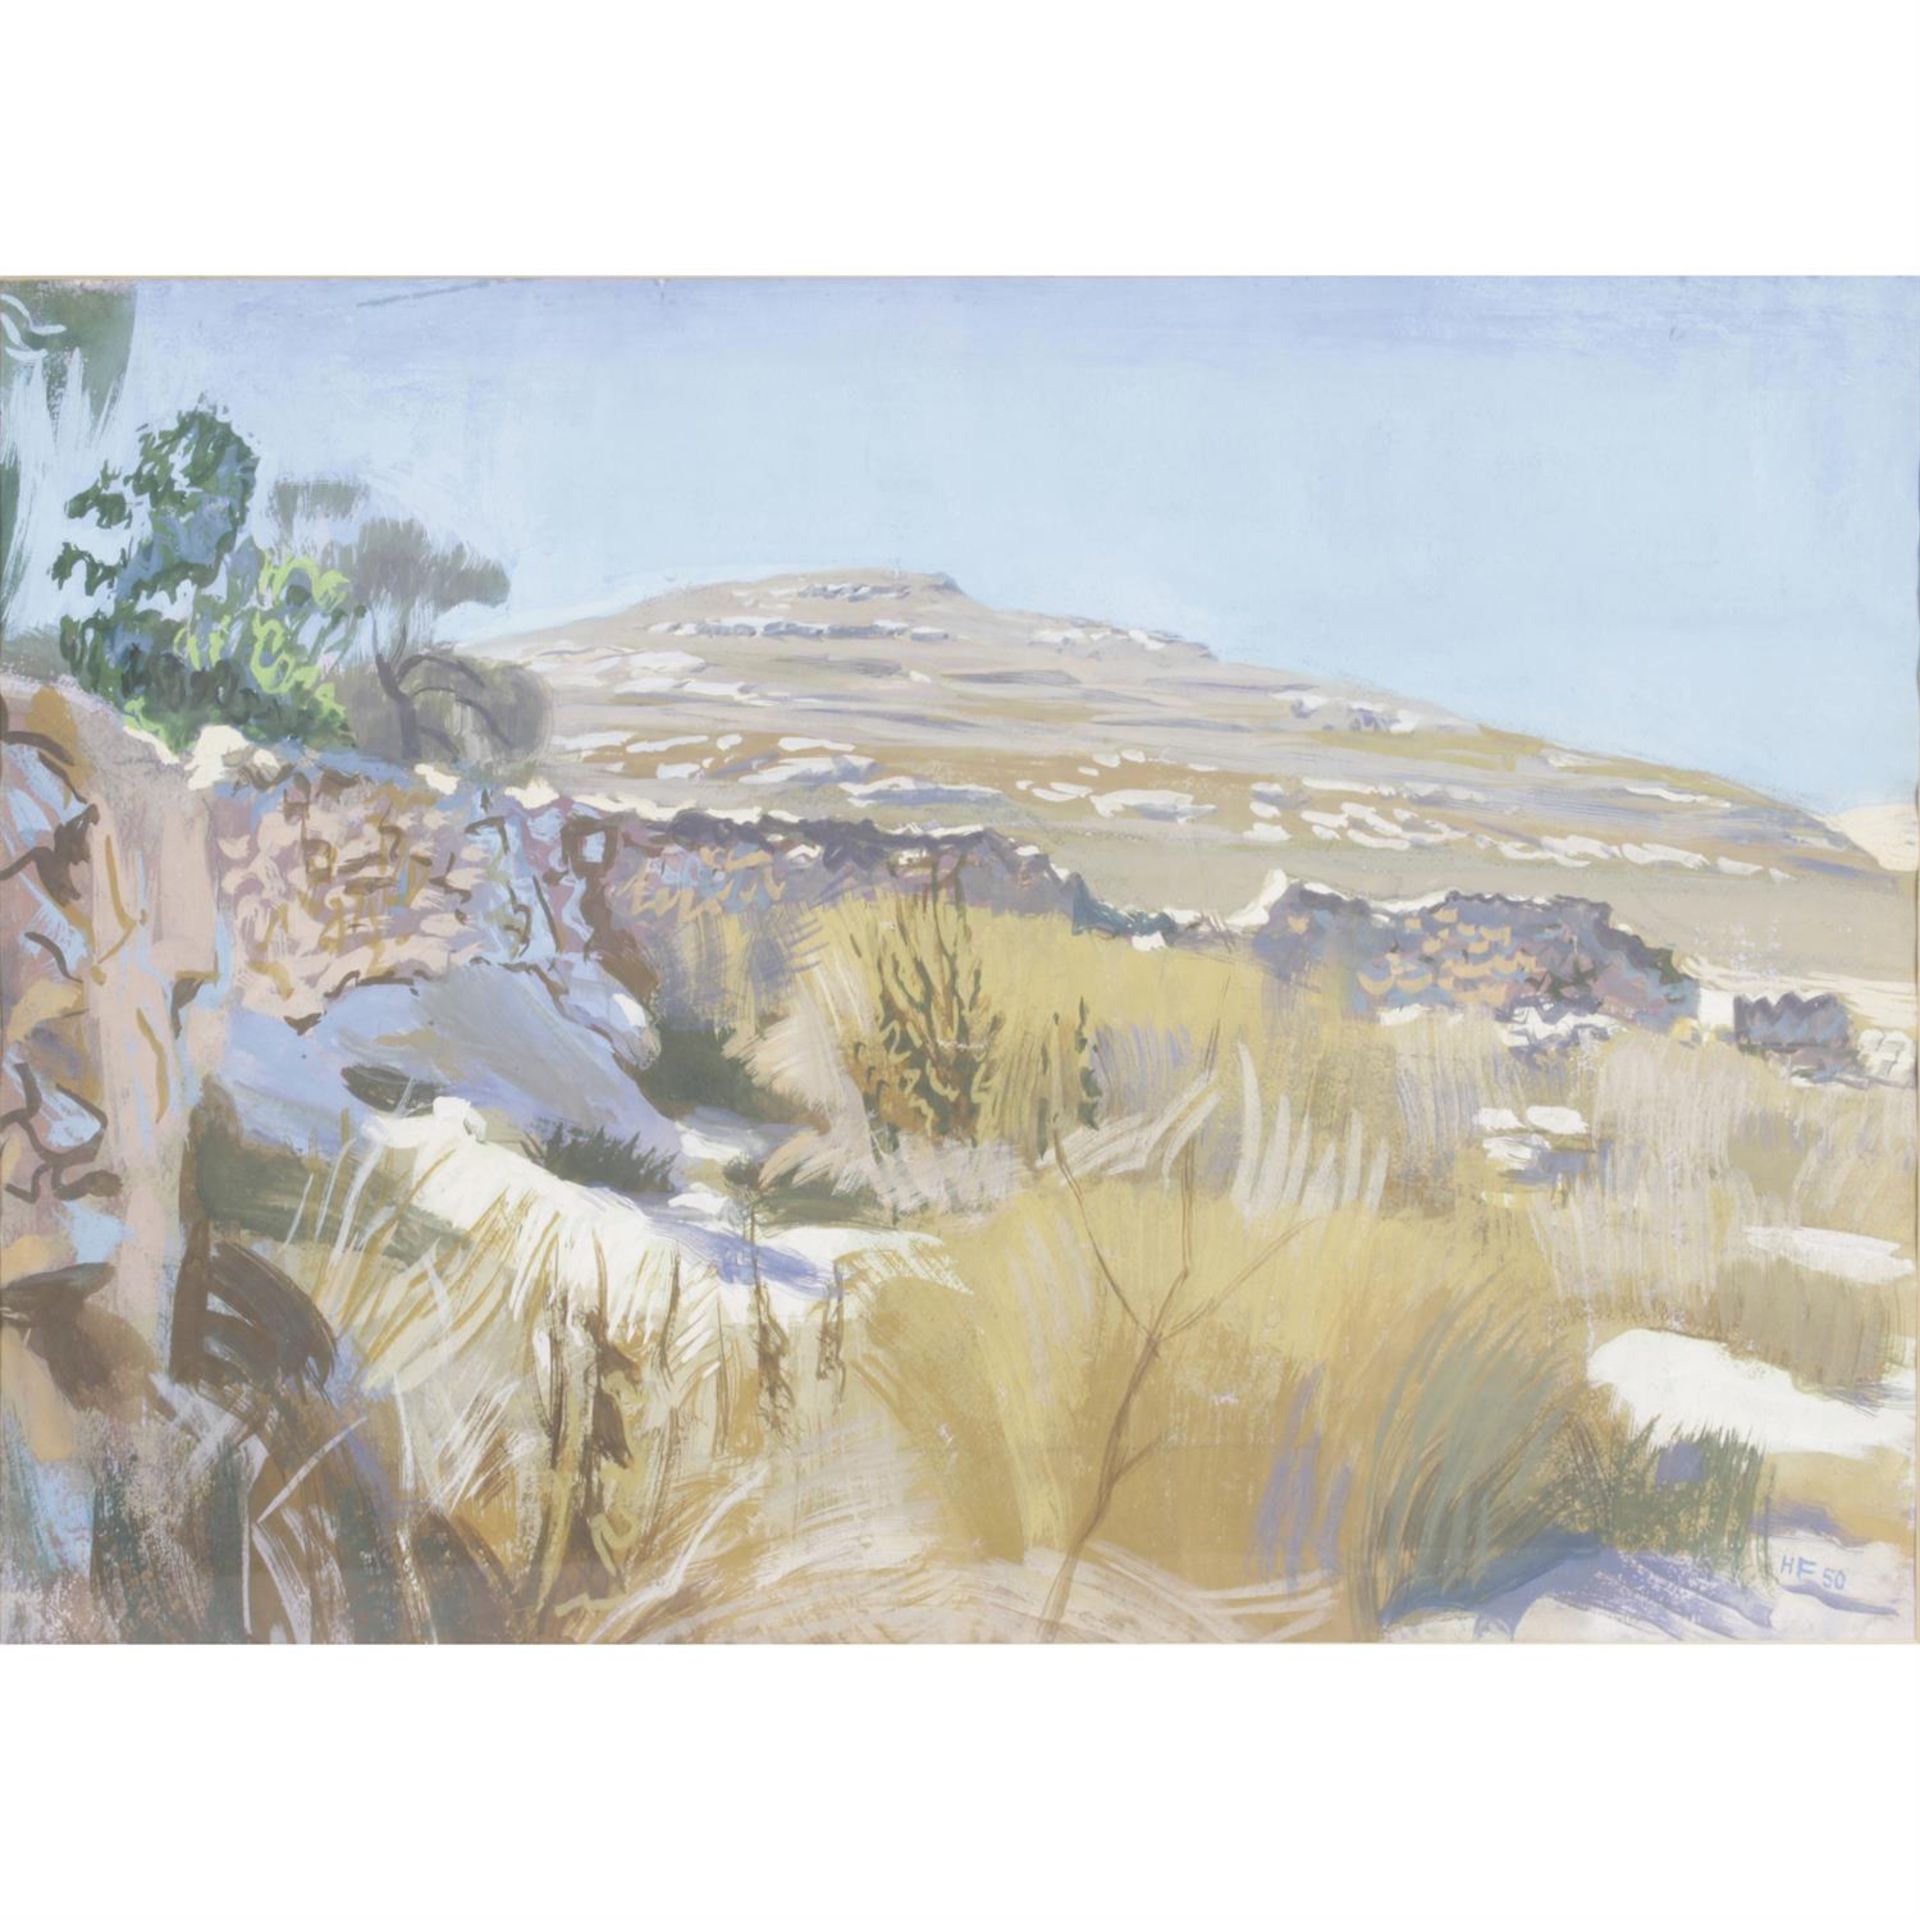 H. Feibusch (20th century), The Road To Jerusalem, gouache painting, together with a watercolour